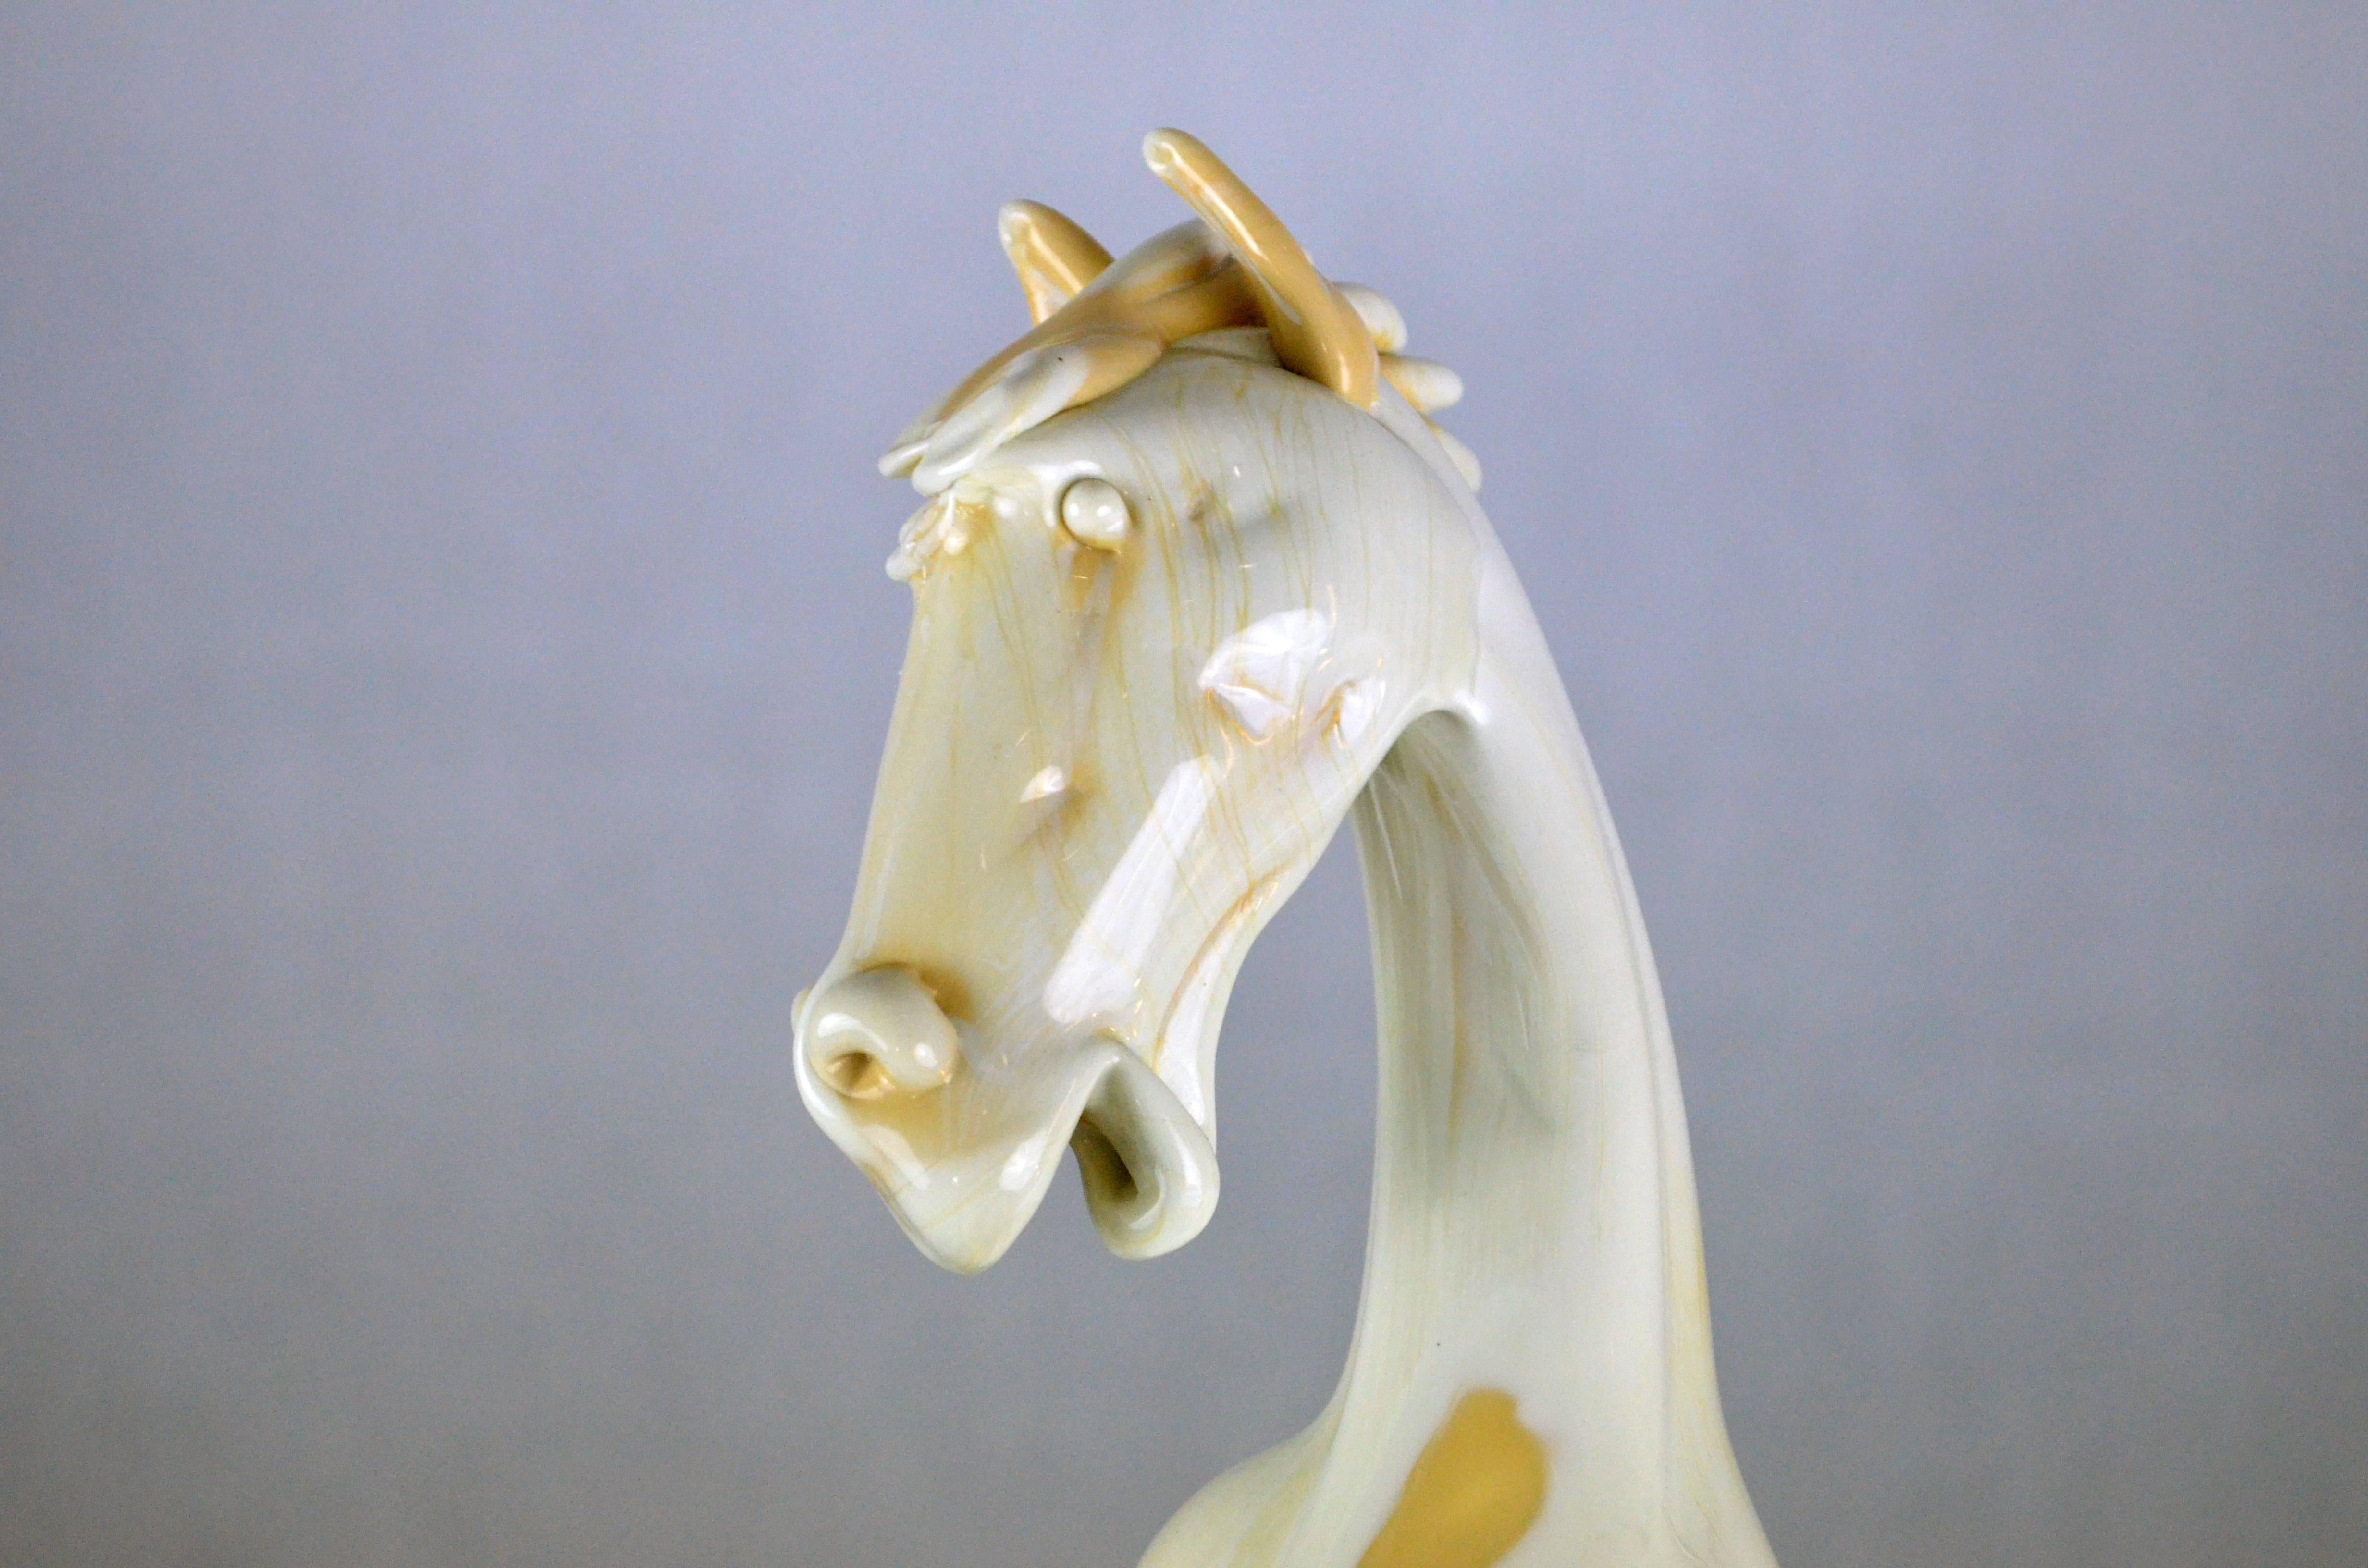 An exceptional blown-glass horse sculpture, signed by the Murano master glassmaker 